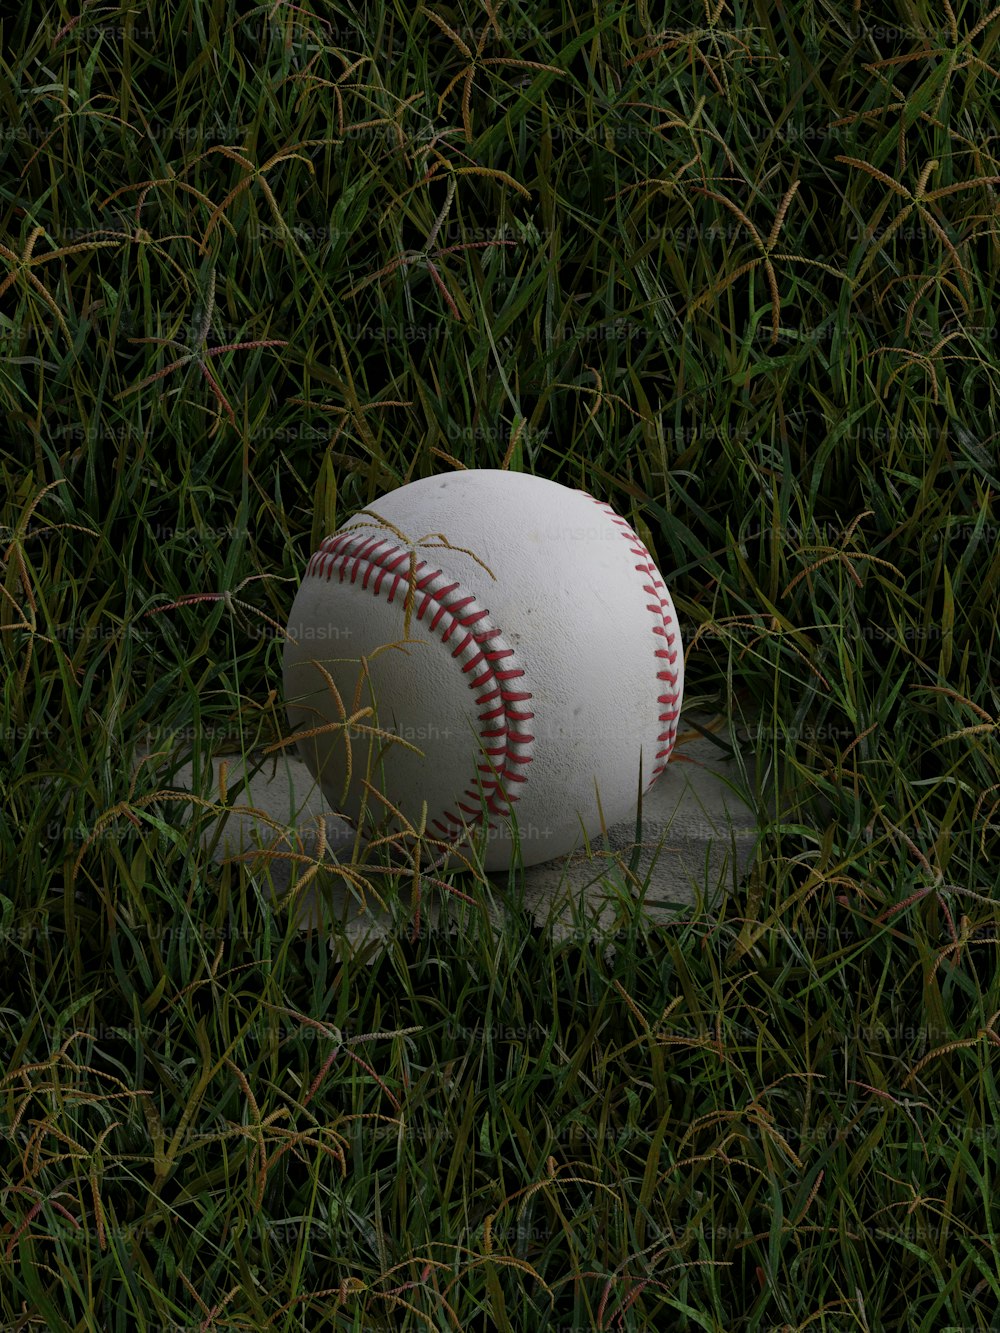 a baseball laying on top of a baseball in the grass